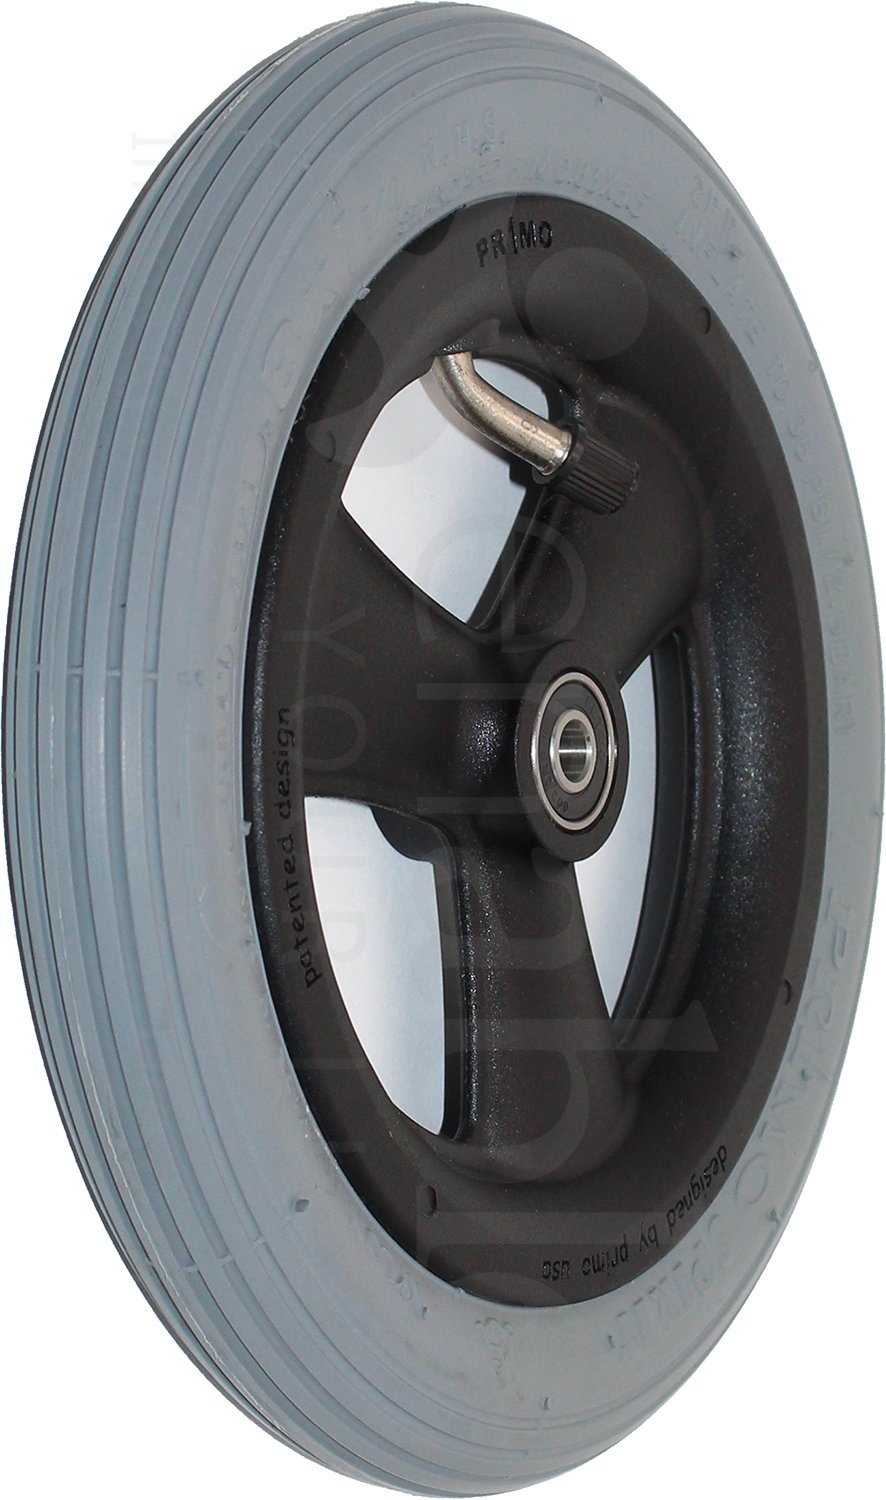 8 x 1 1/4 in. Primo Hollow Spoke Pneumatic Wheelchair Caster Wheel - Angled view shown